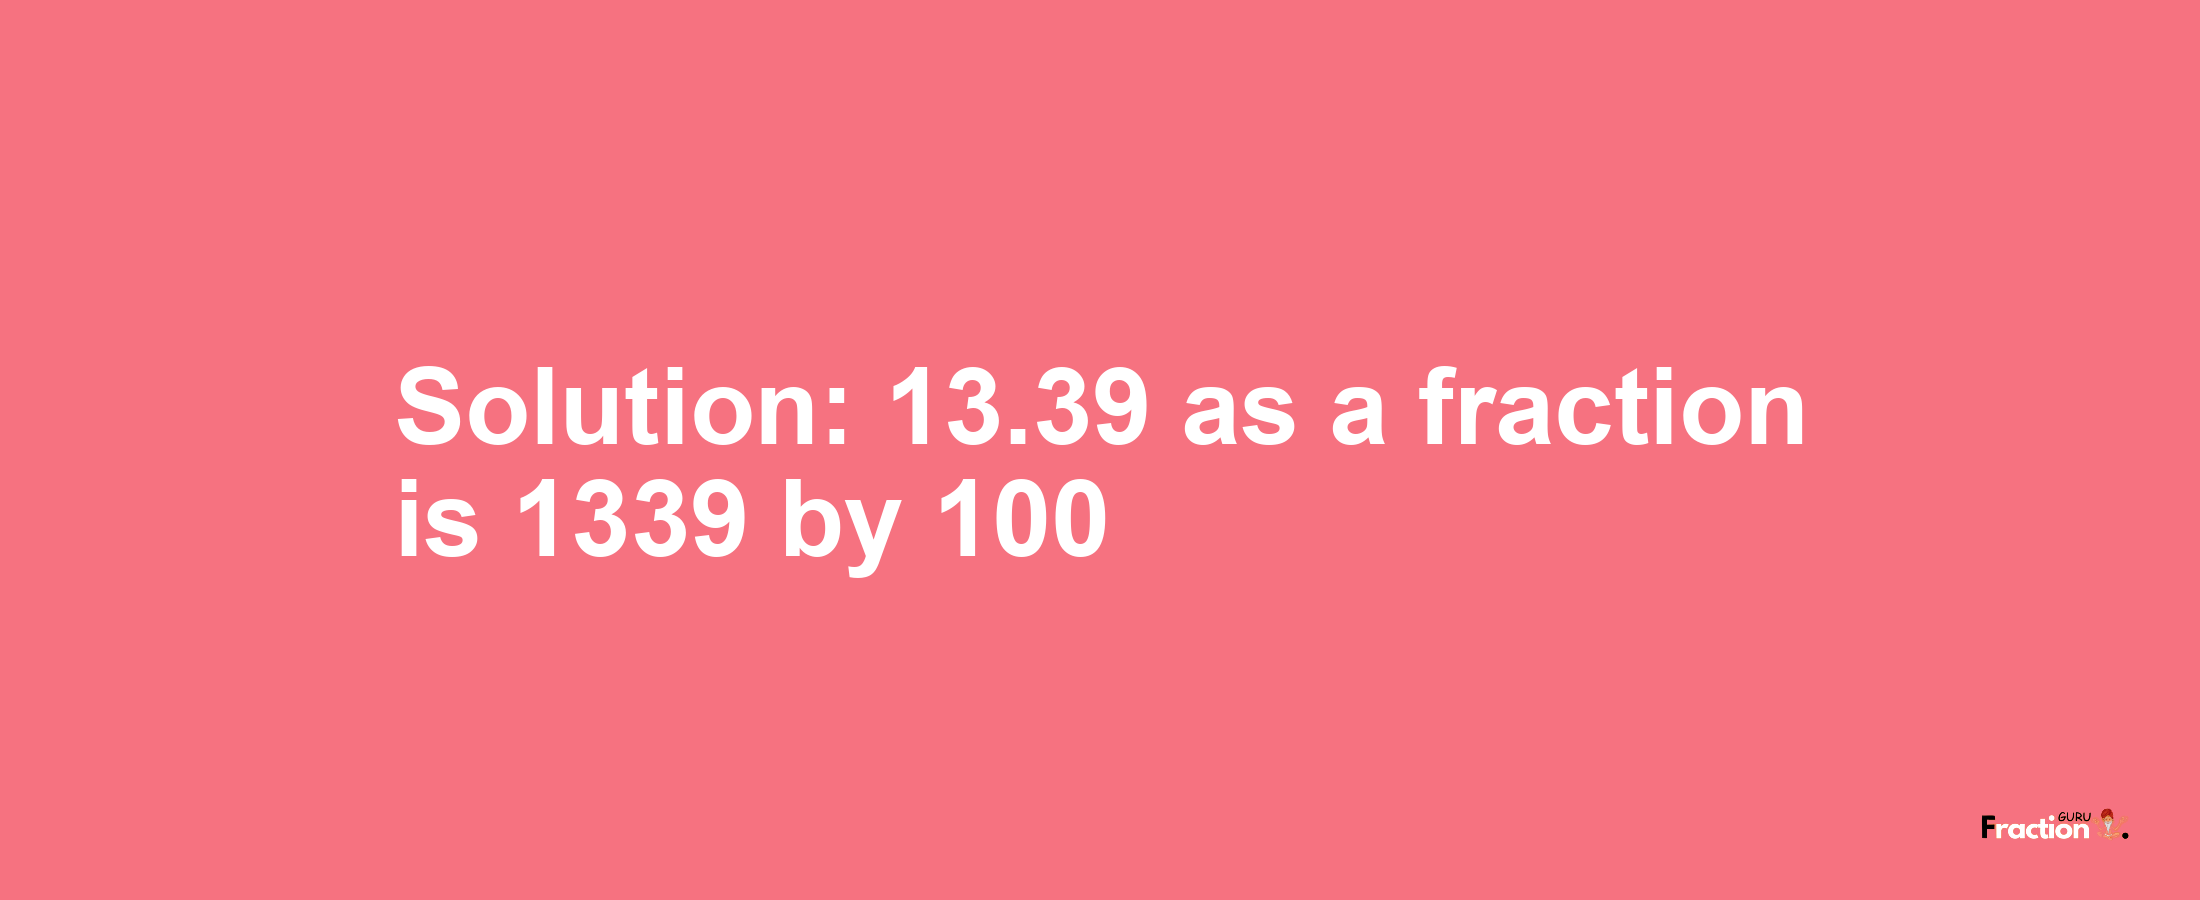 Solution:13.39 as a fraction is 1339/100